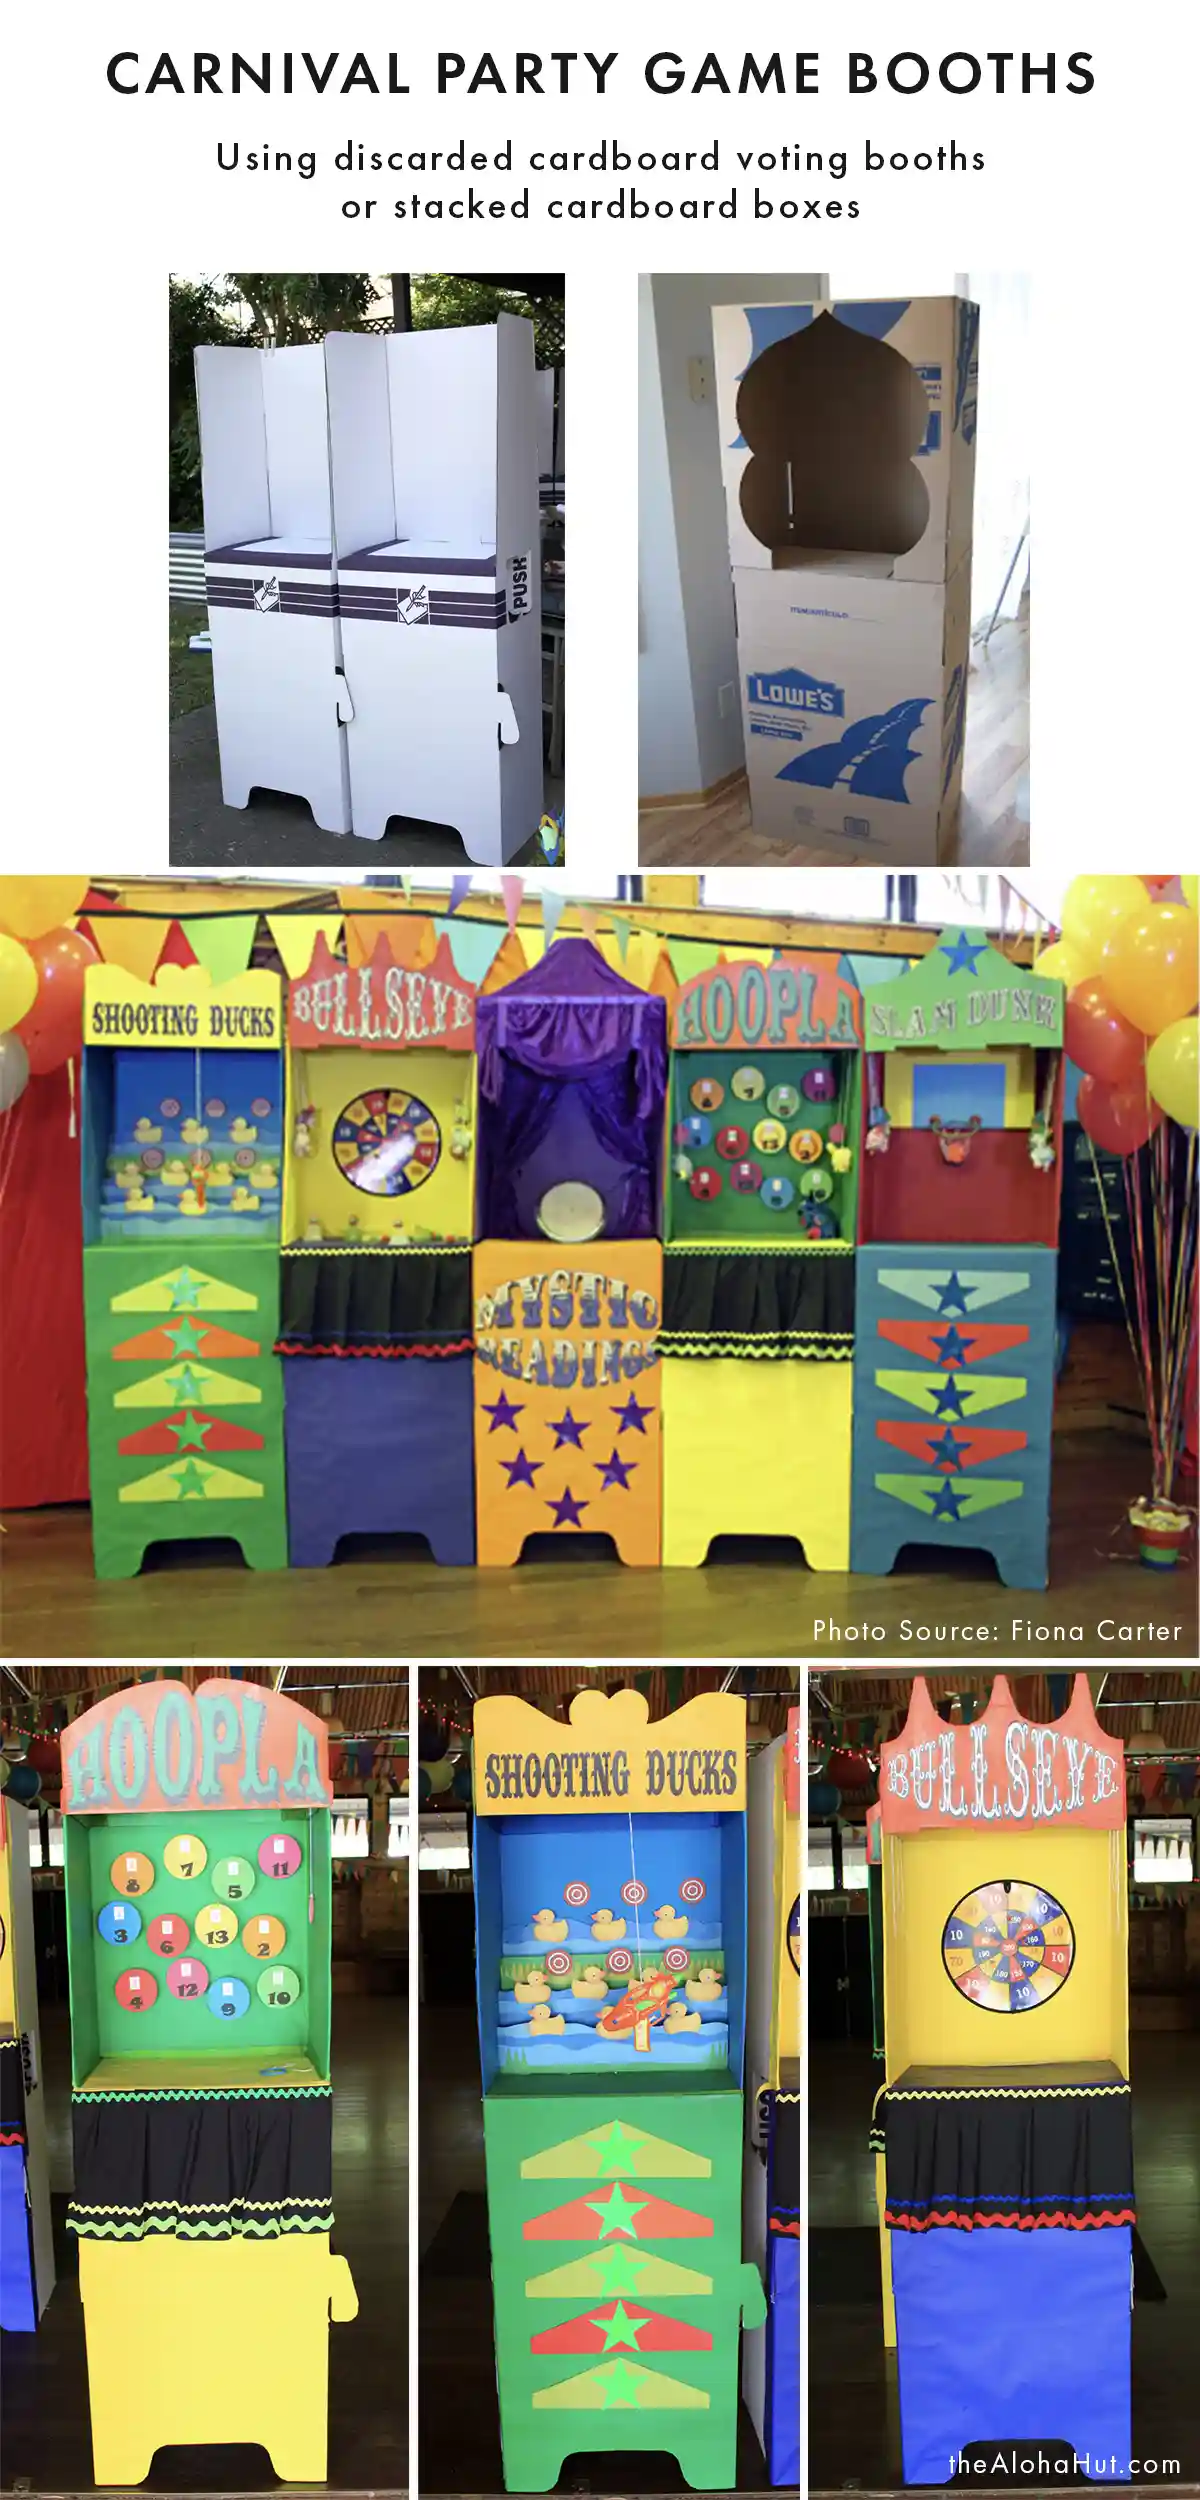 Carnival Party Ideas - Carnival Party Cardboard Game Booths